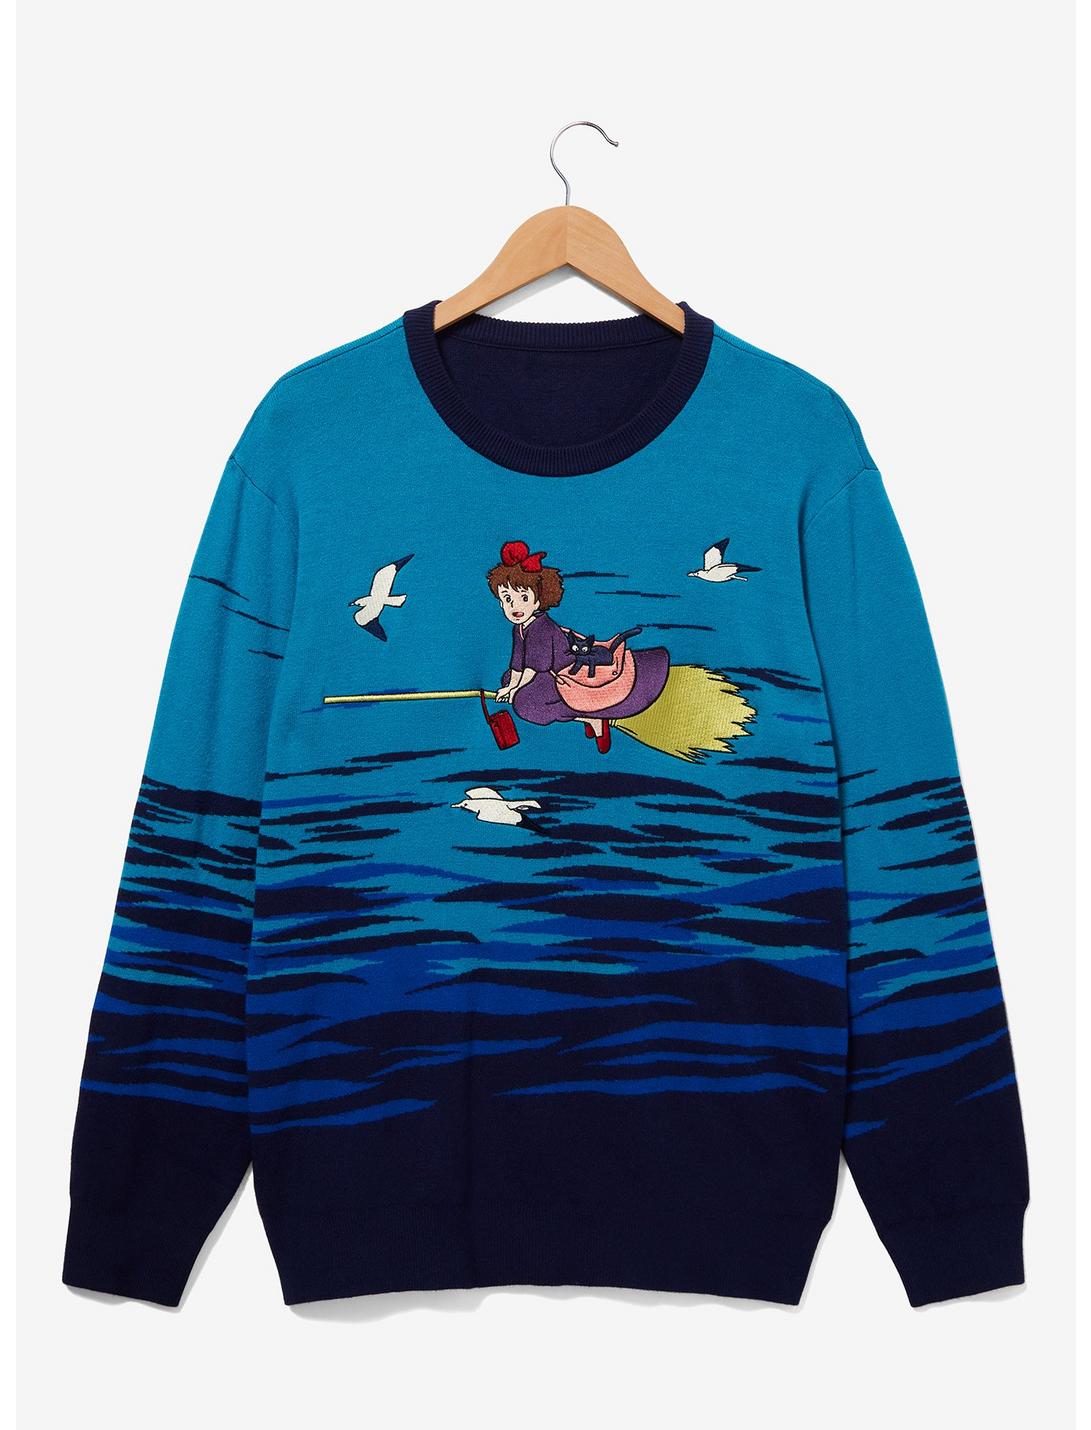 Our Universe Studio Ghibli Kiki's Delivery Service Kiki Flying Sweater - BoxLunch Exclusive, BLUE, hi-res